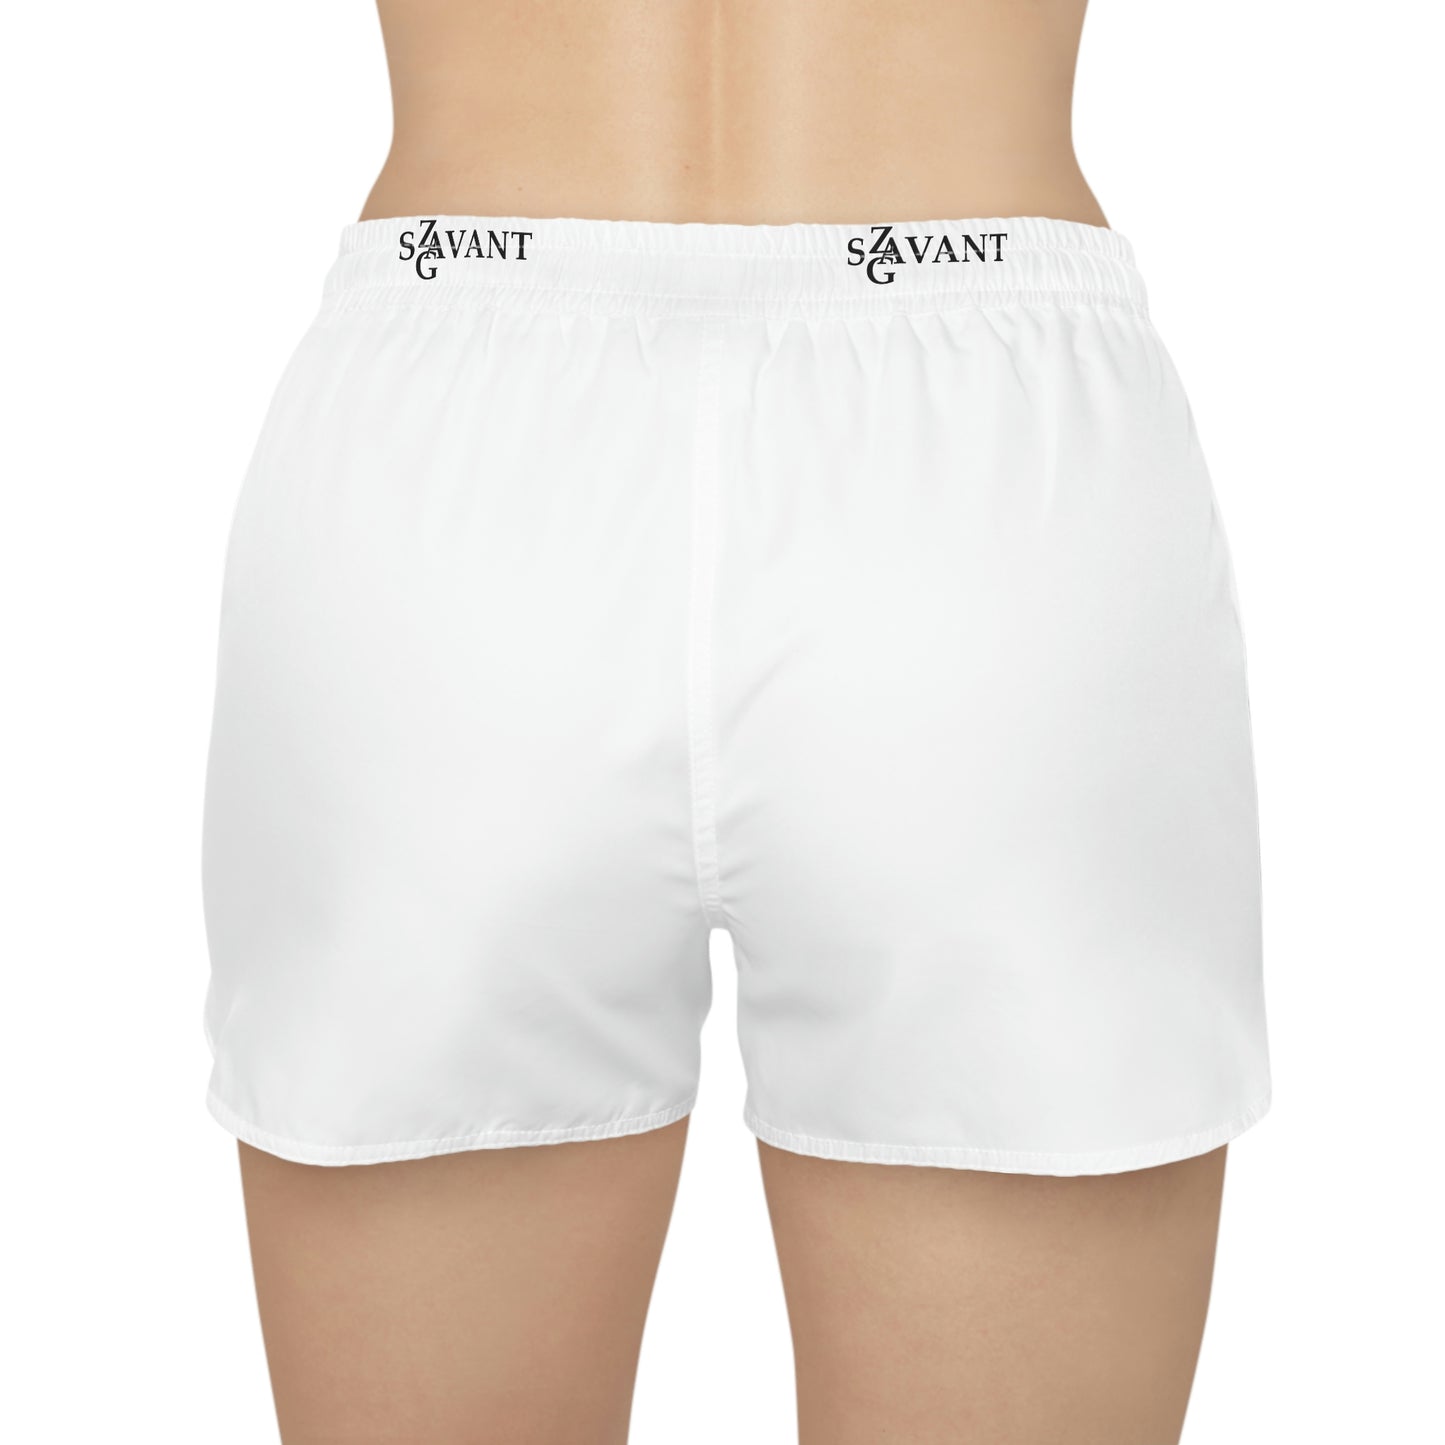 Women's casual drawstring shorts - White (With JA Colors)